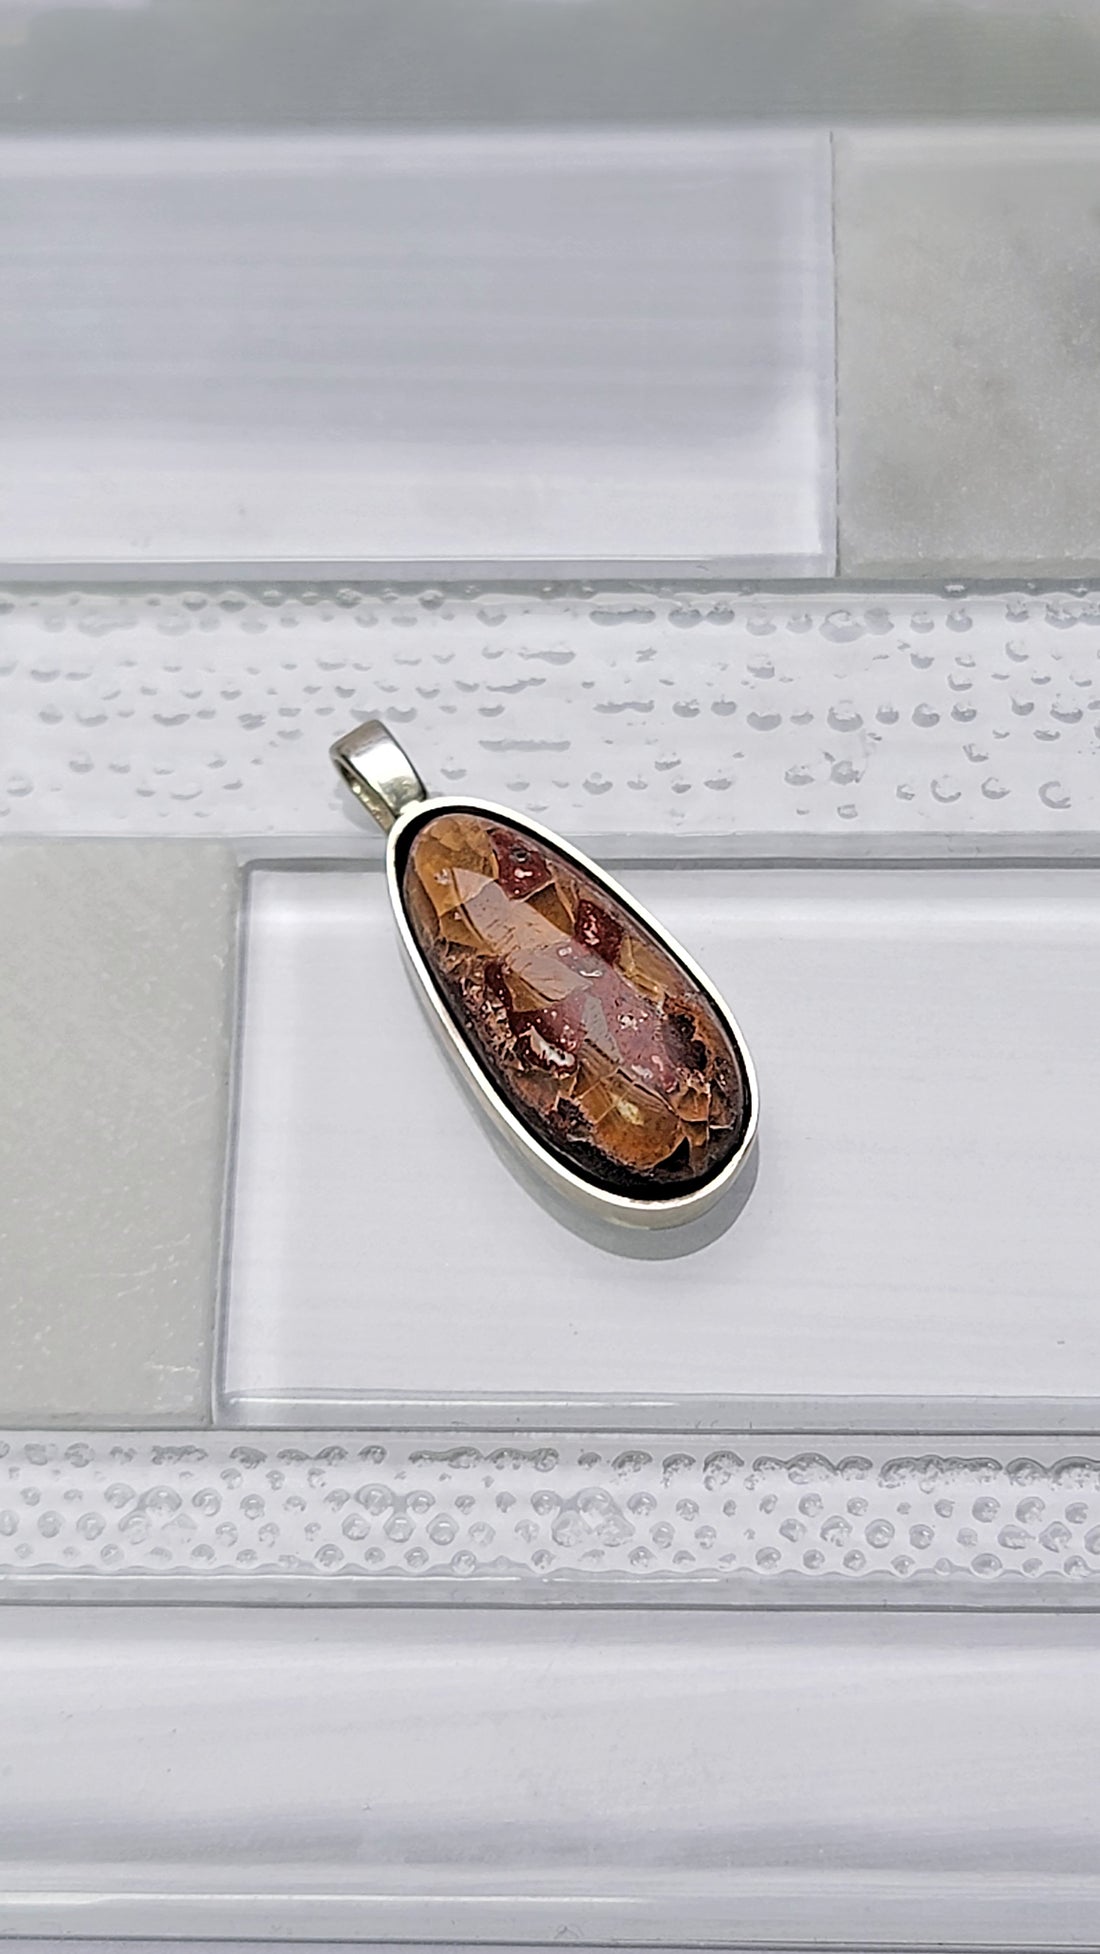 Natural Cantera Mexican Yellow Opal Sterling Silver & Copper Pendant - AA Grade Opal